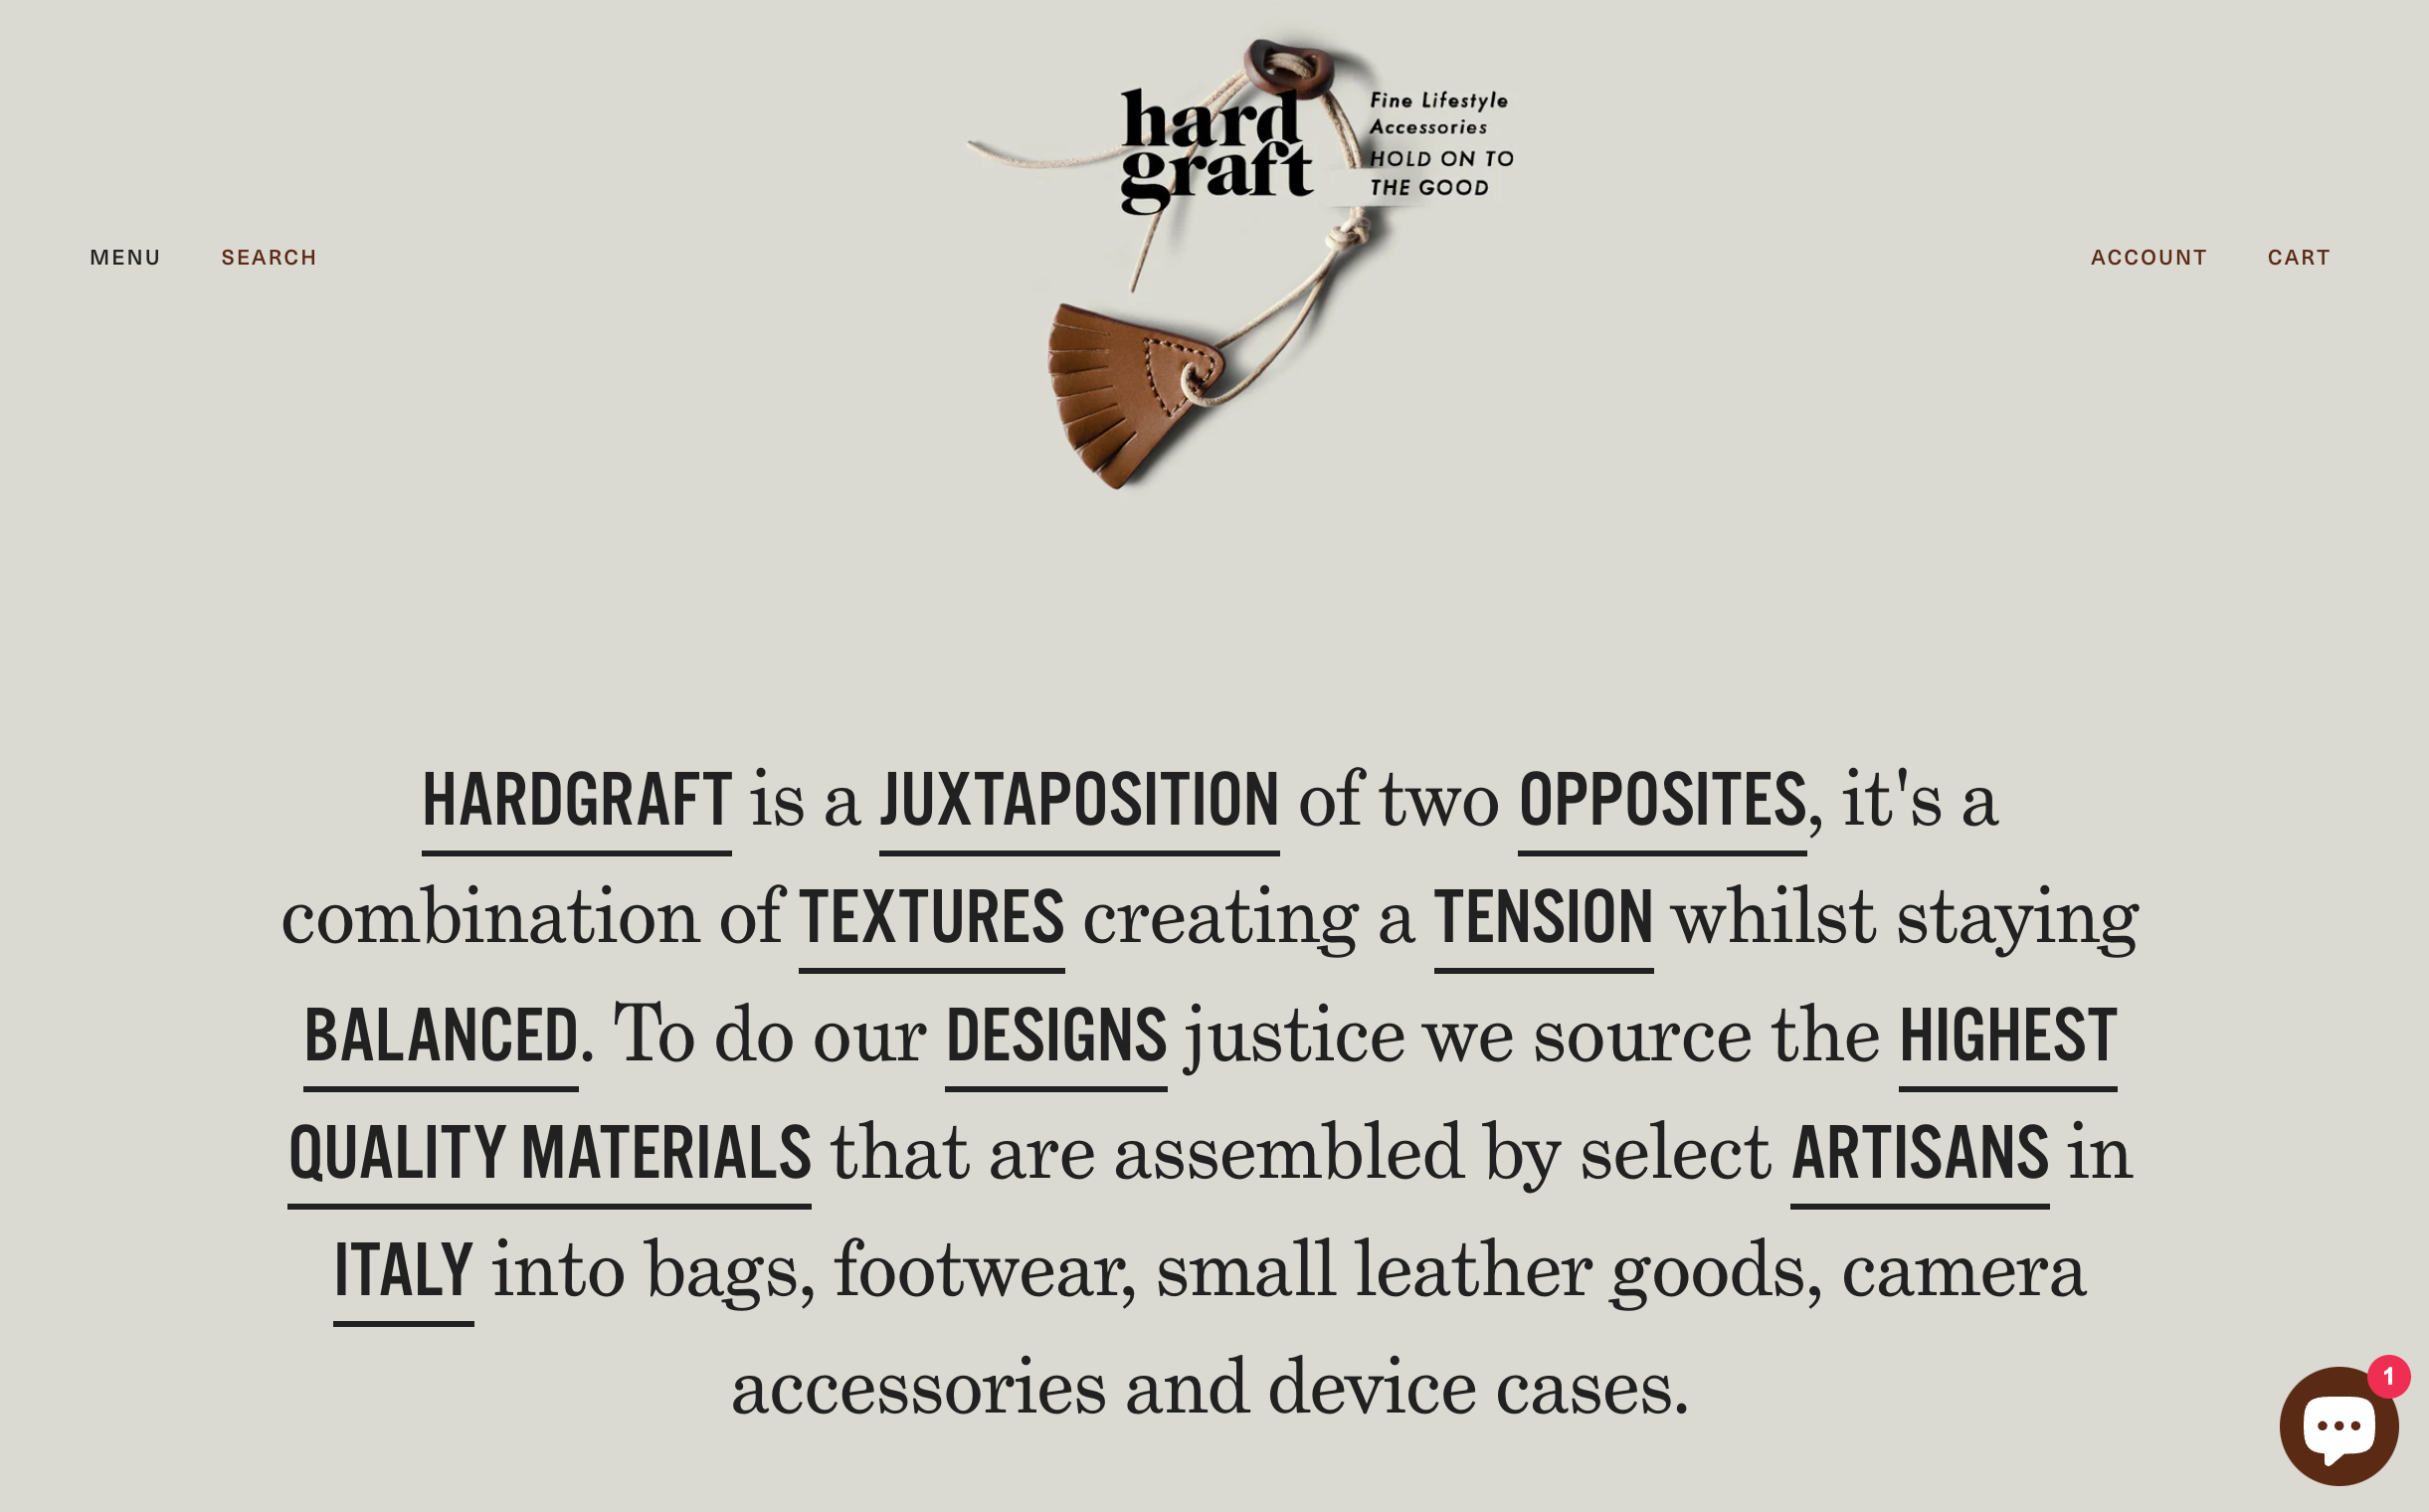 A page on Hardgraft's ecommerce website showing a brand story